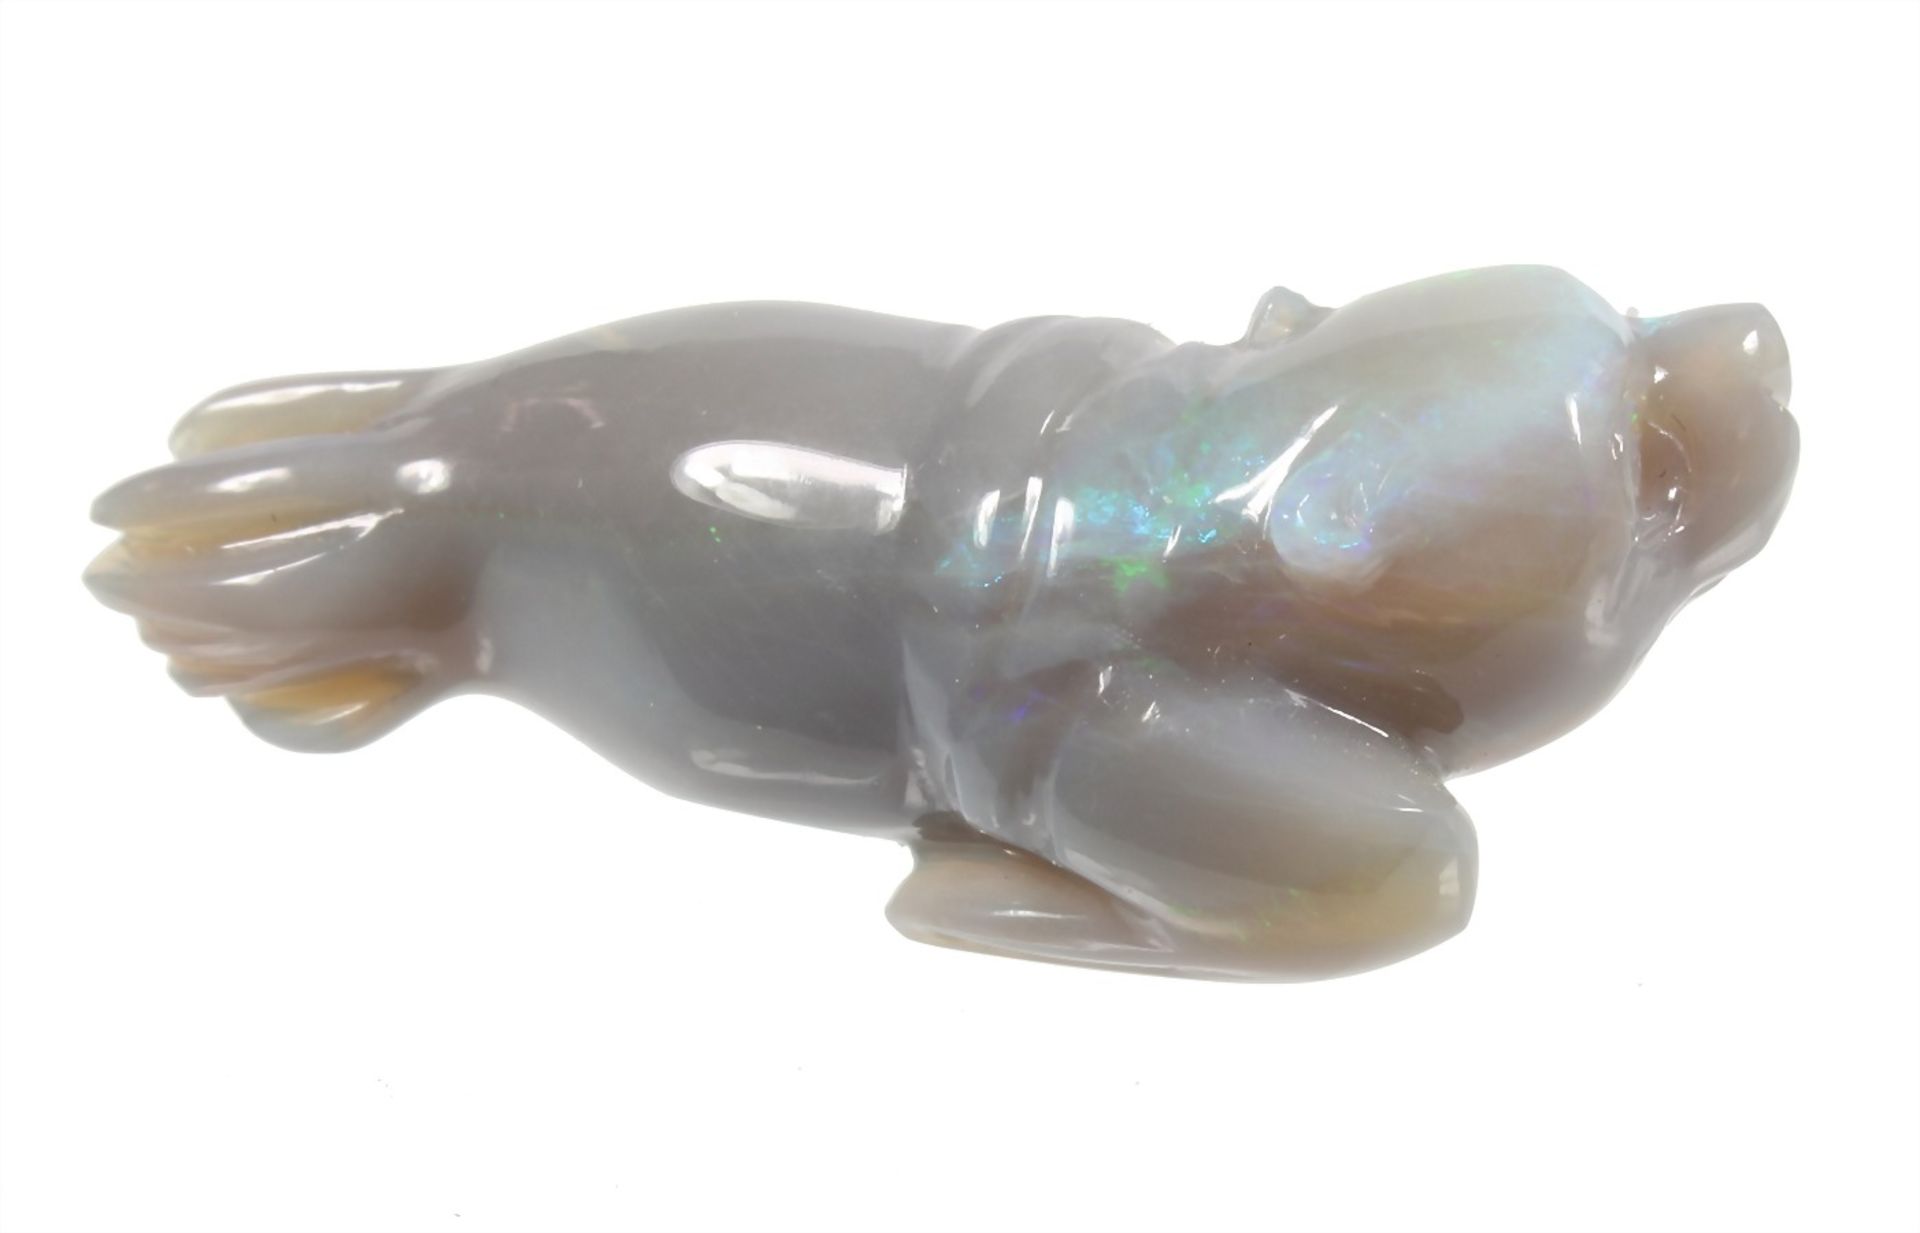 small plastic: seal, plastic engraved opal, c. 42.7 x 17.5 x 14.7 mm, total 8.8 g (44.0 ct) - Image 2 of 2